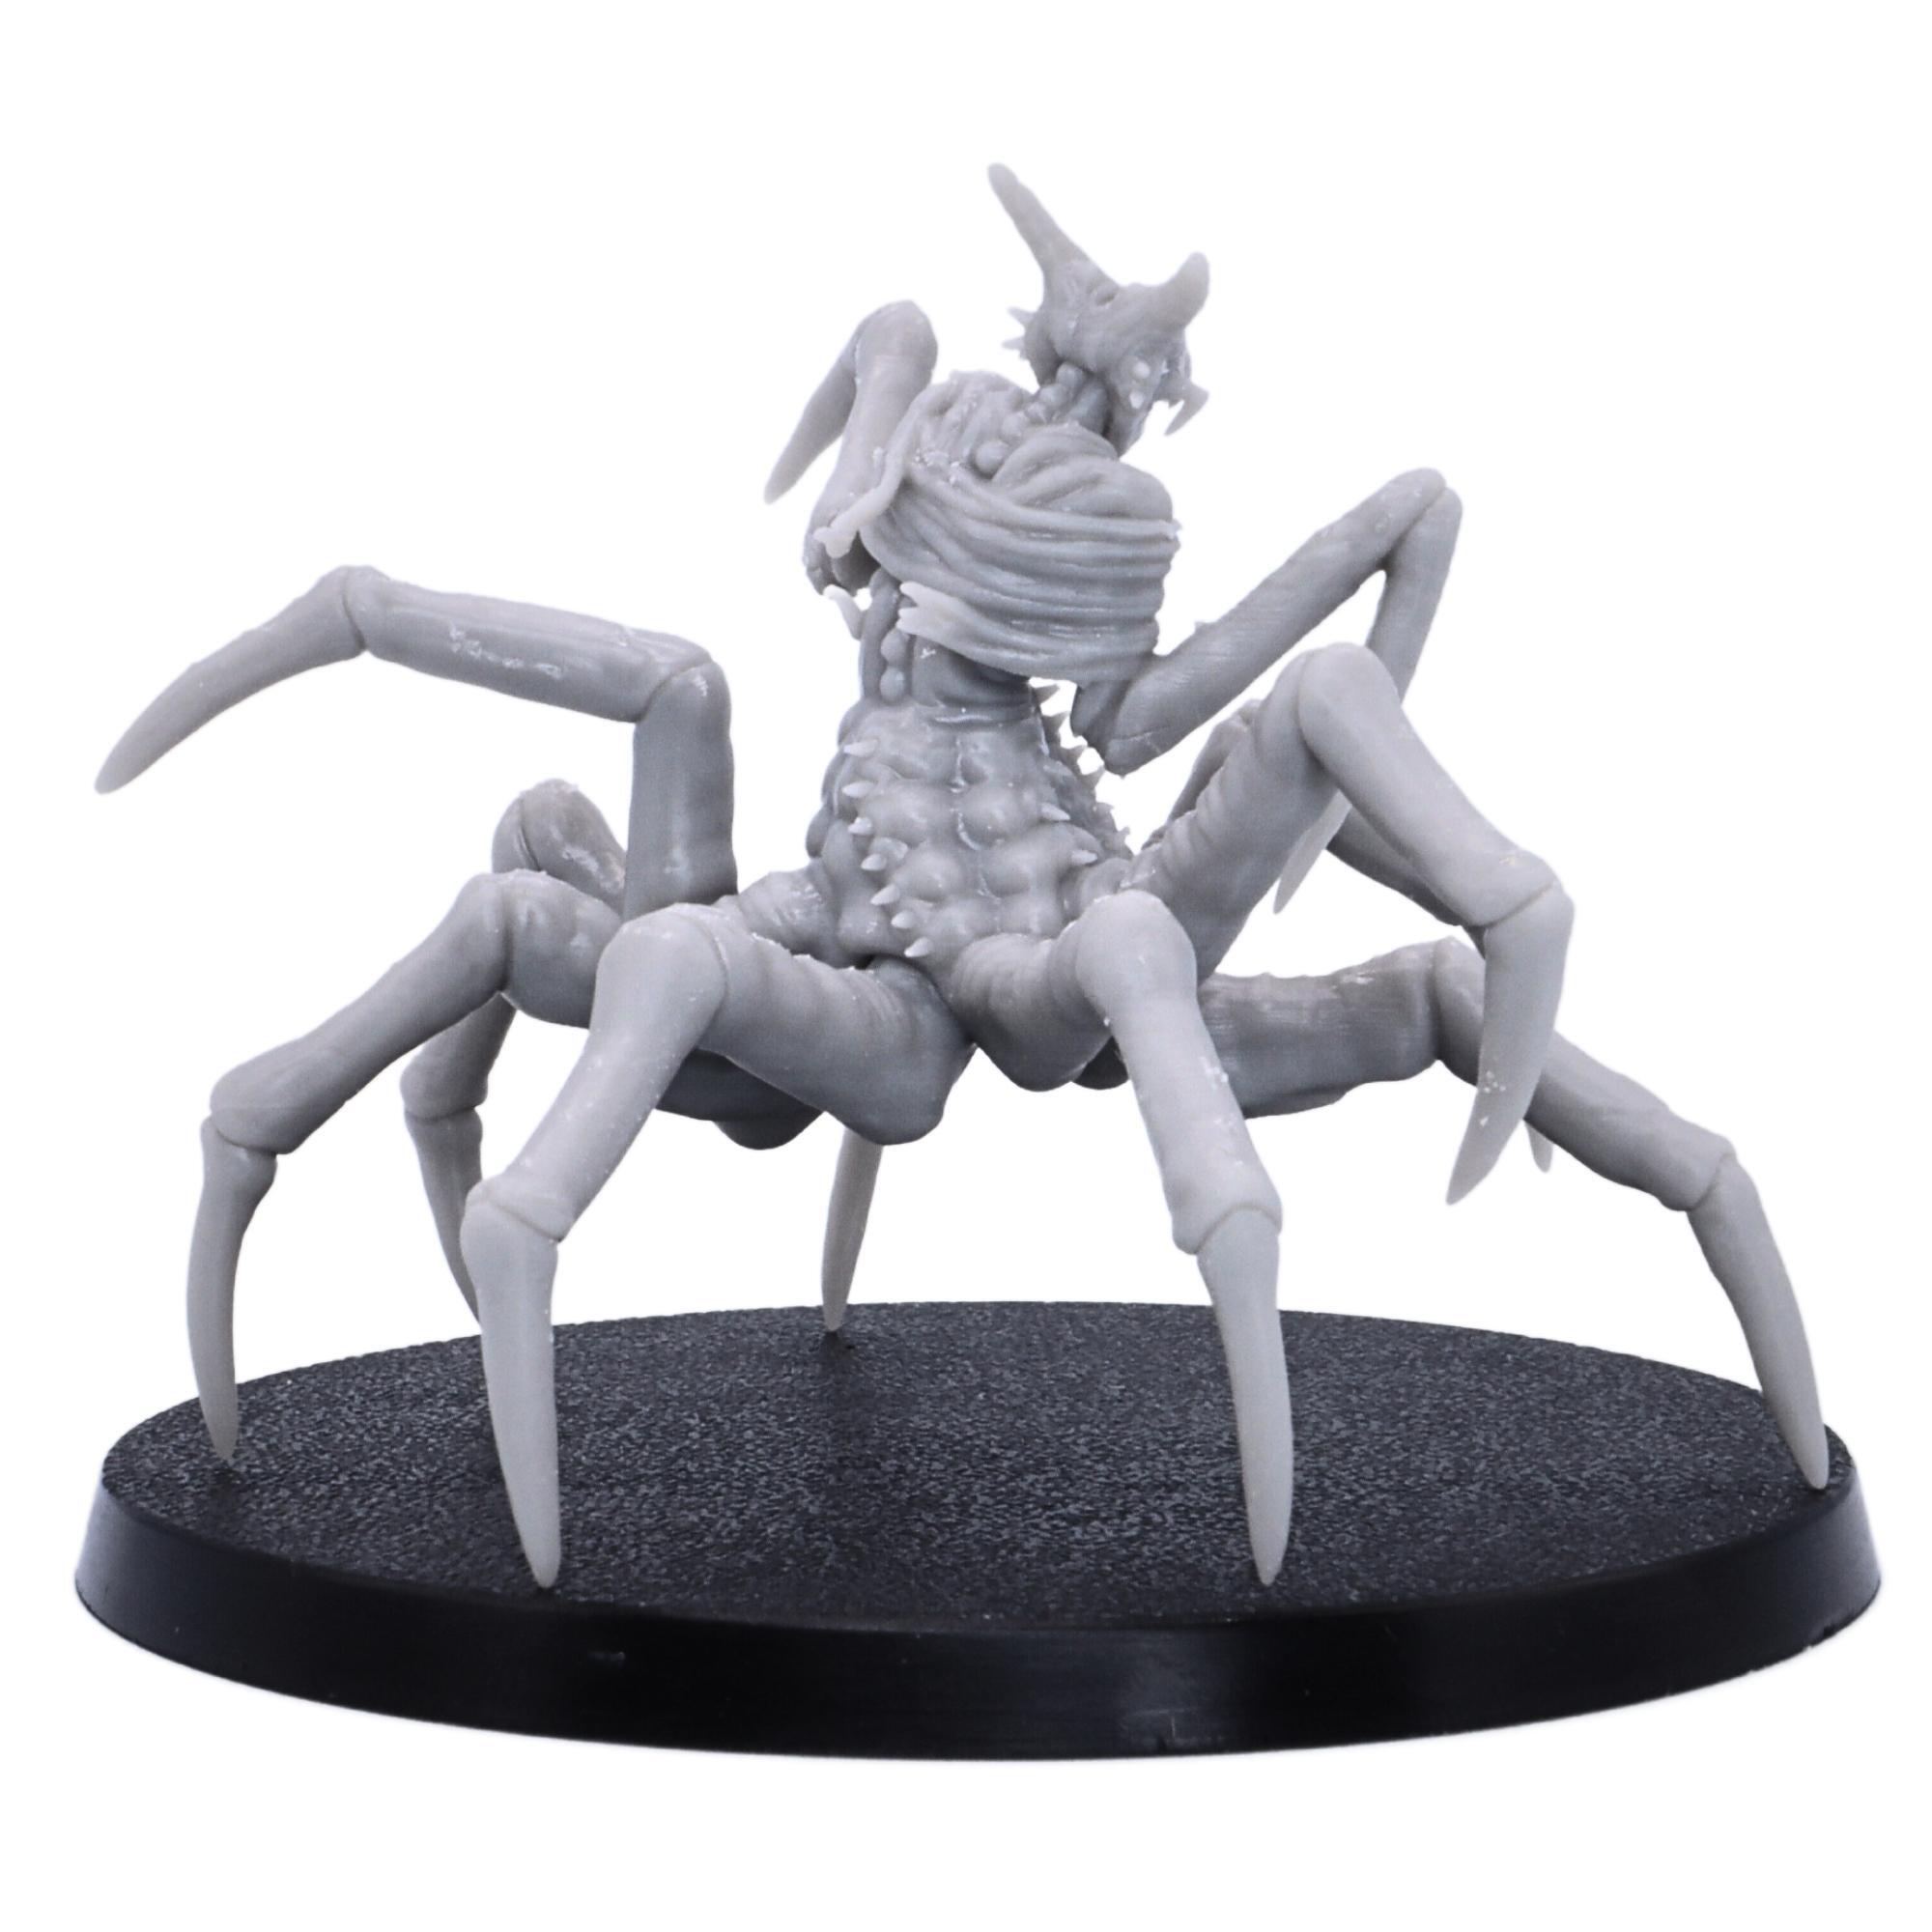 Monster creature designed by Epic Miniatures